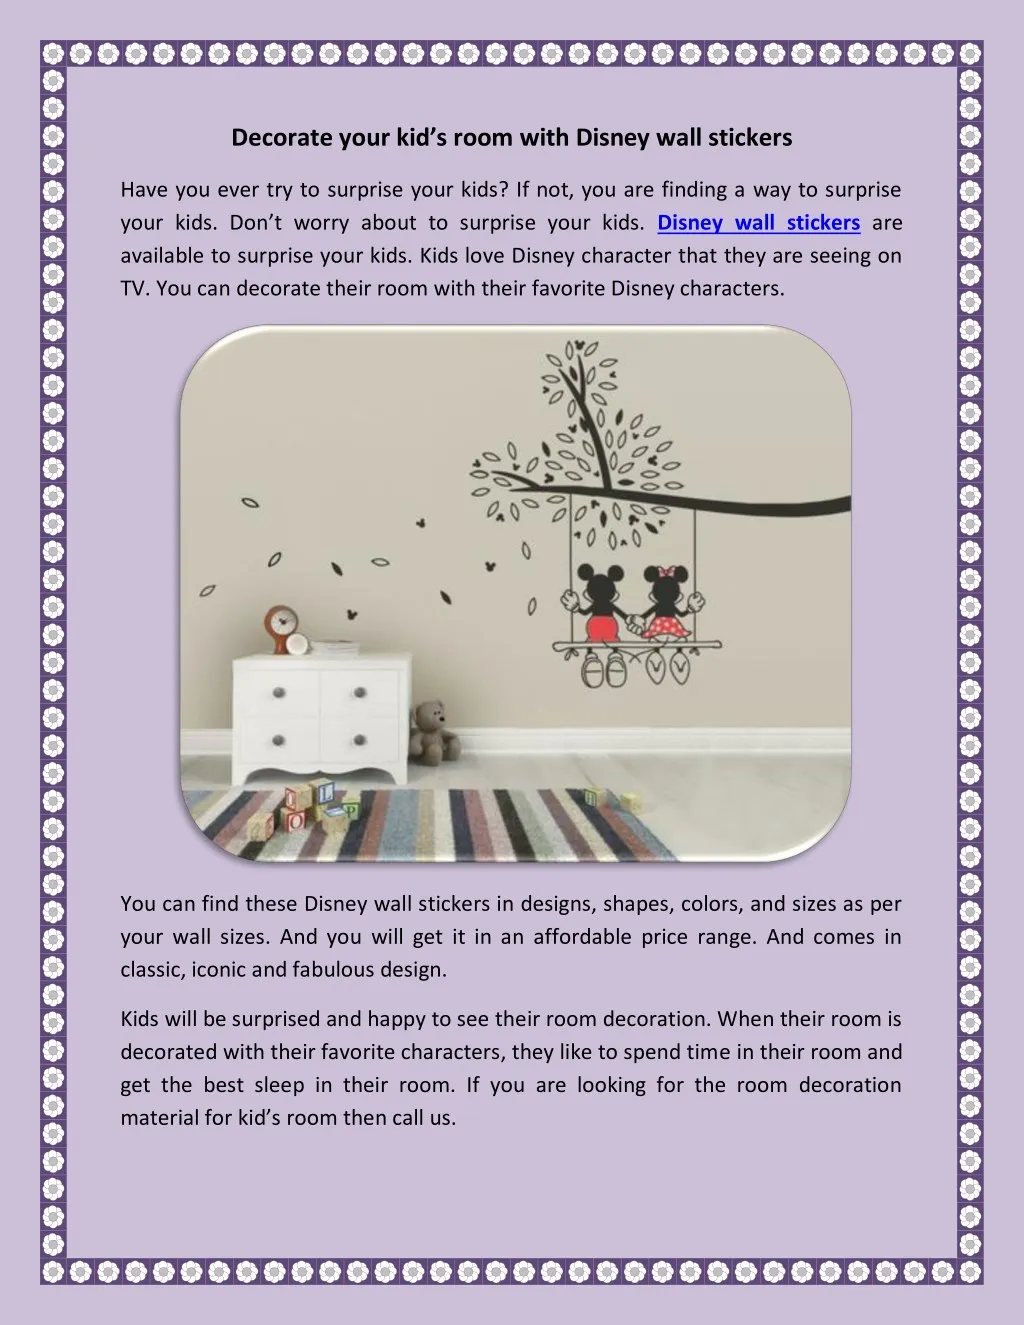 decorate your kid s room with disney wall stickers